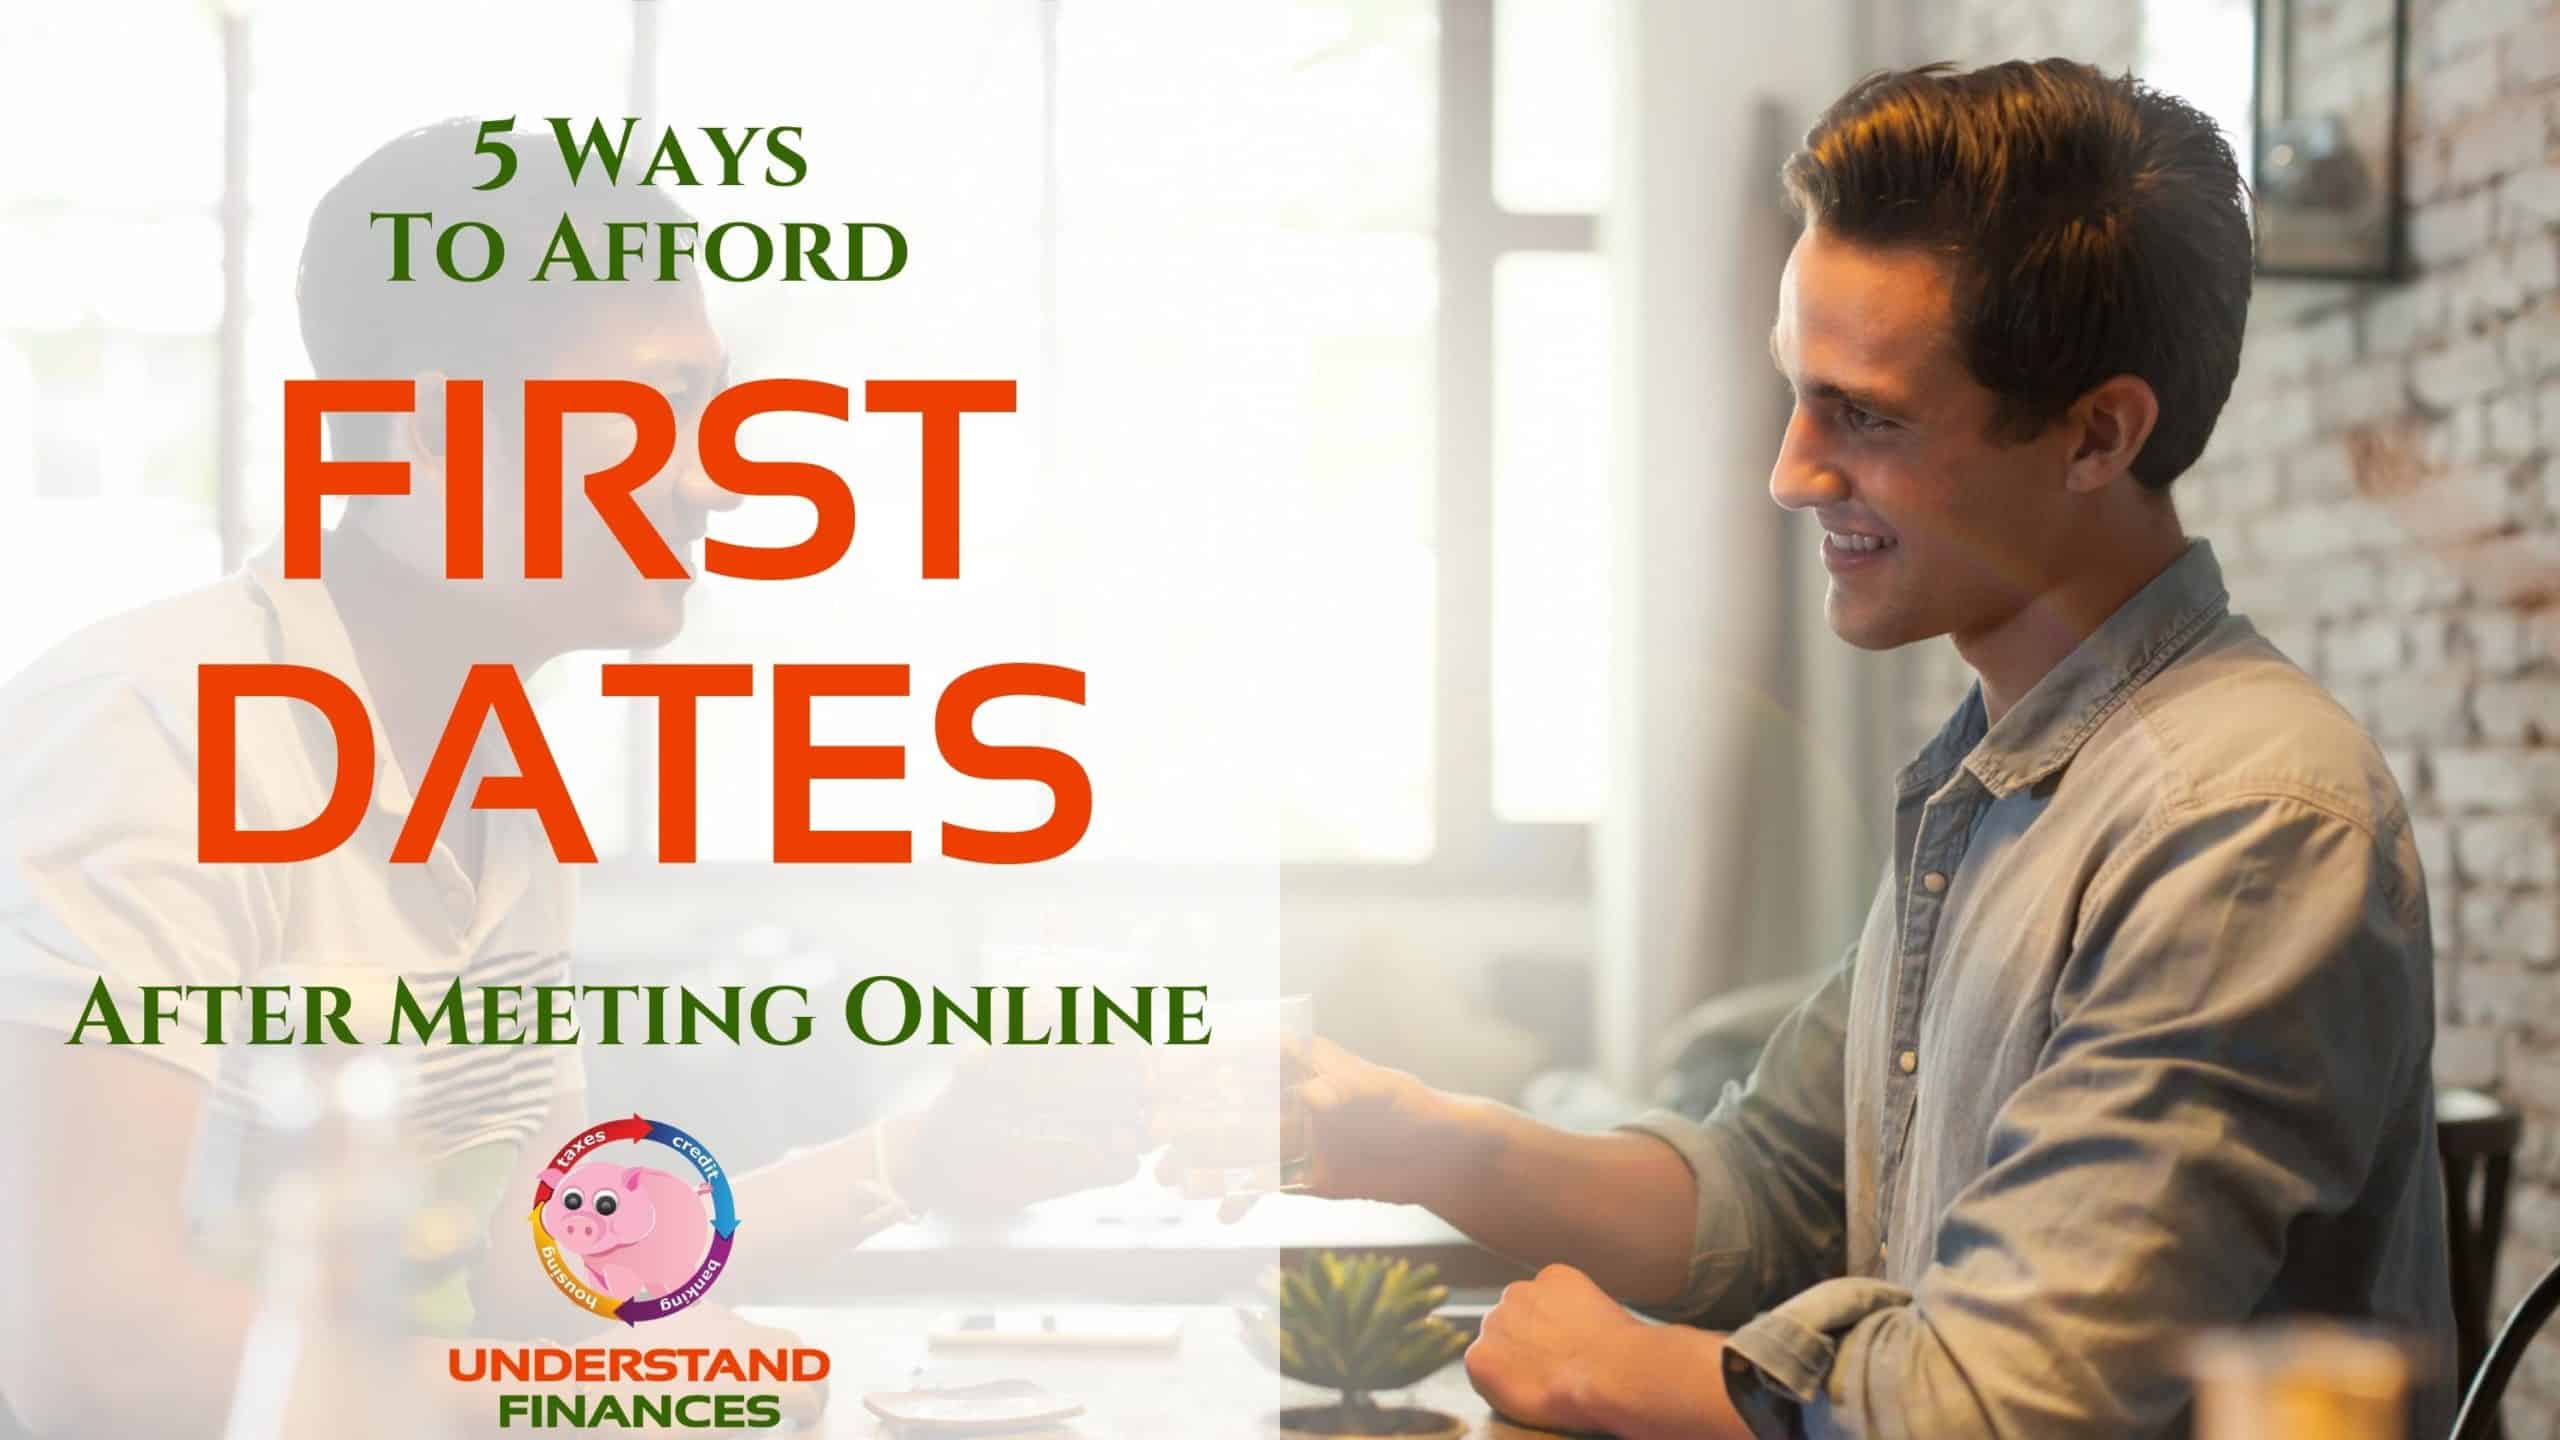 5 Ways To Afford First Dates After Meeting Online